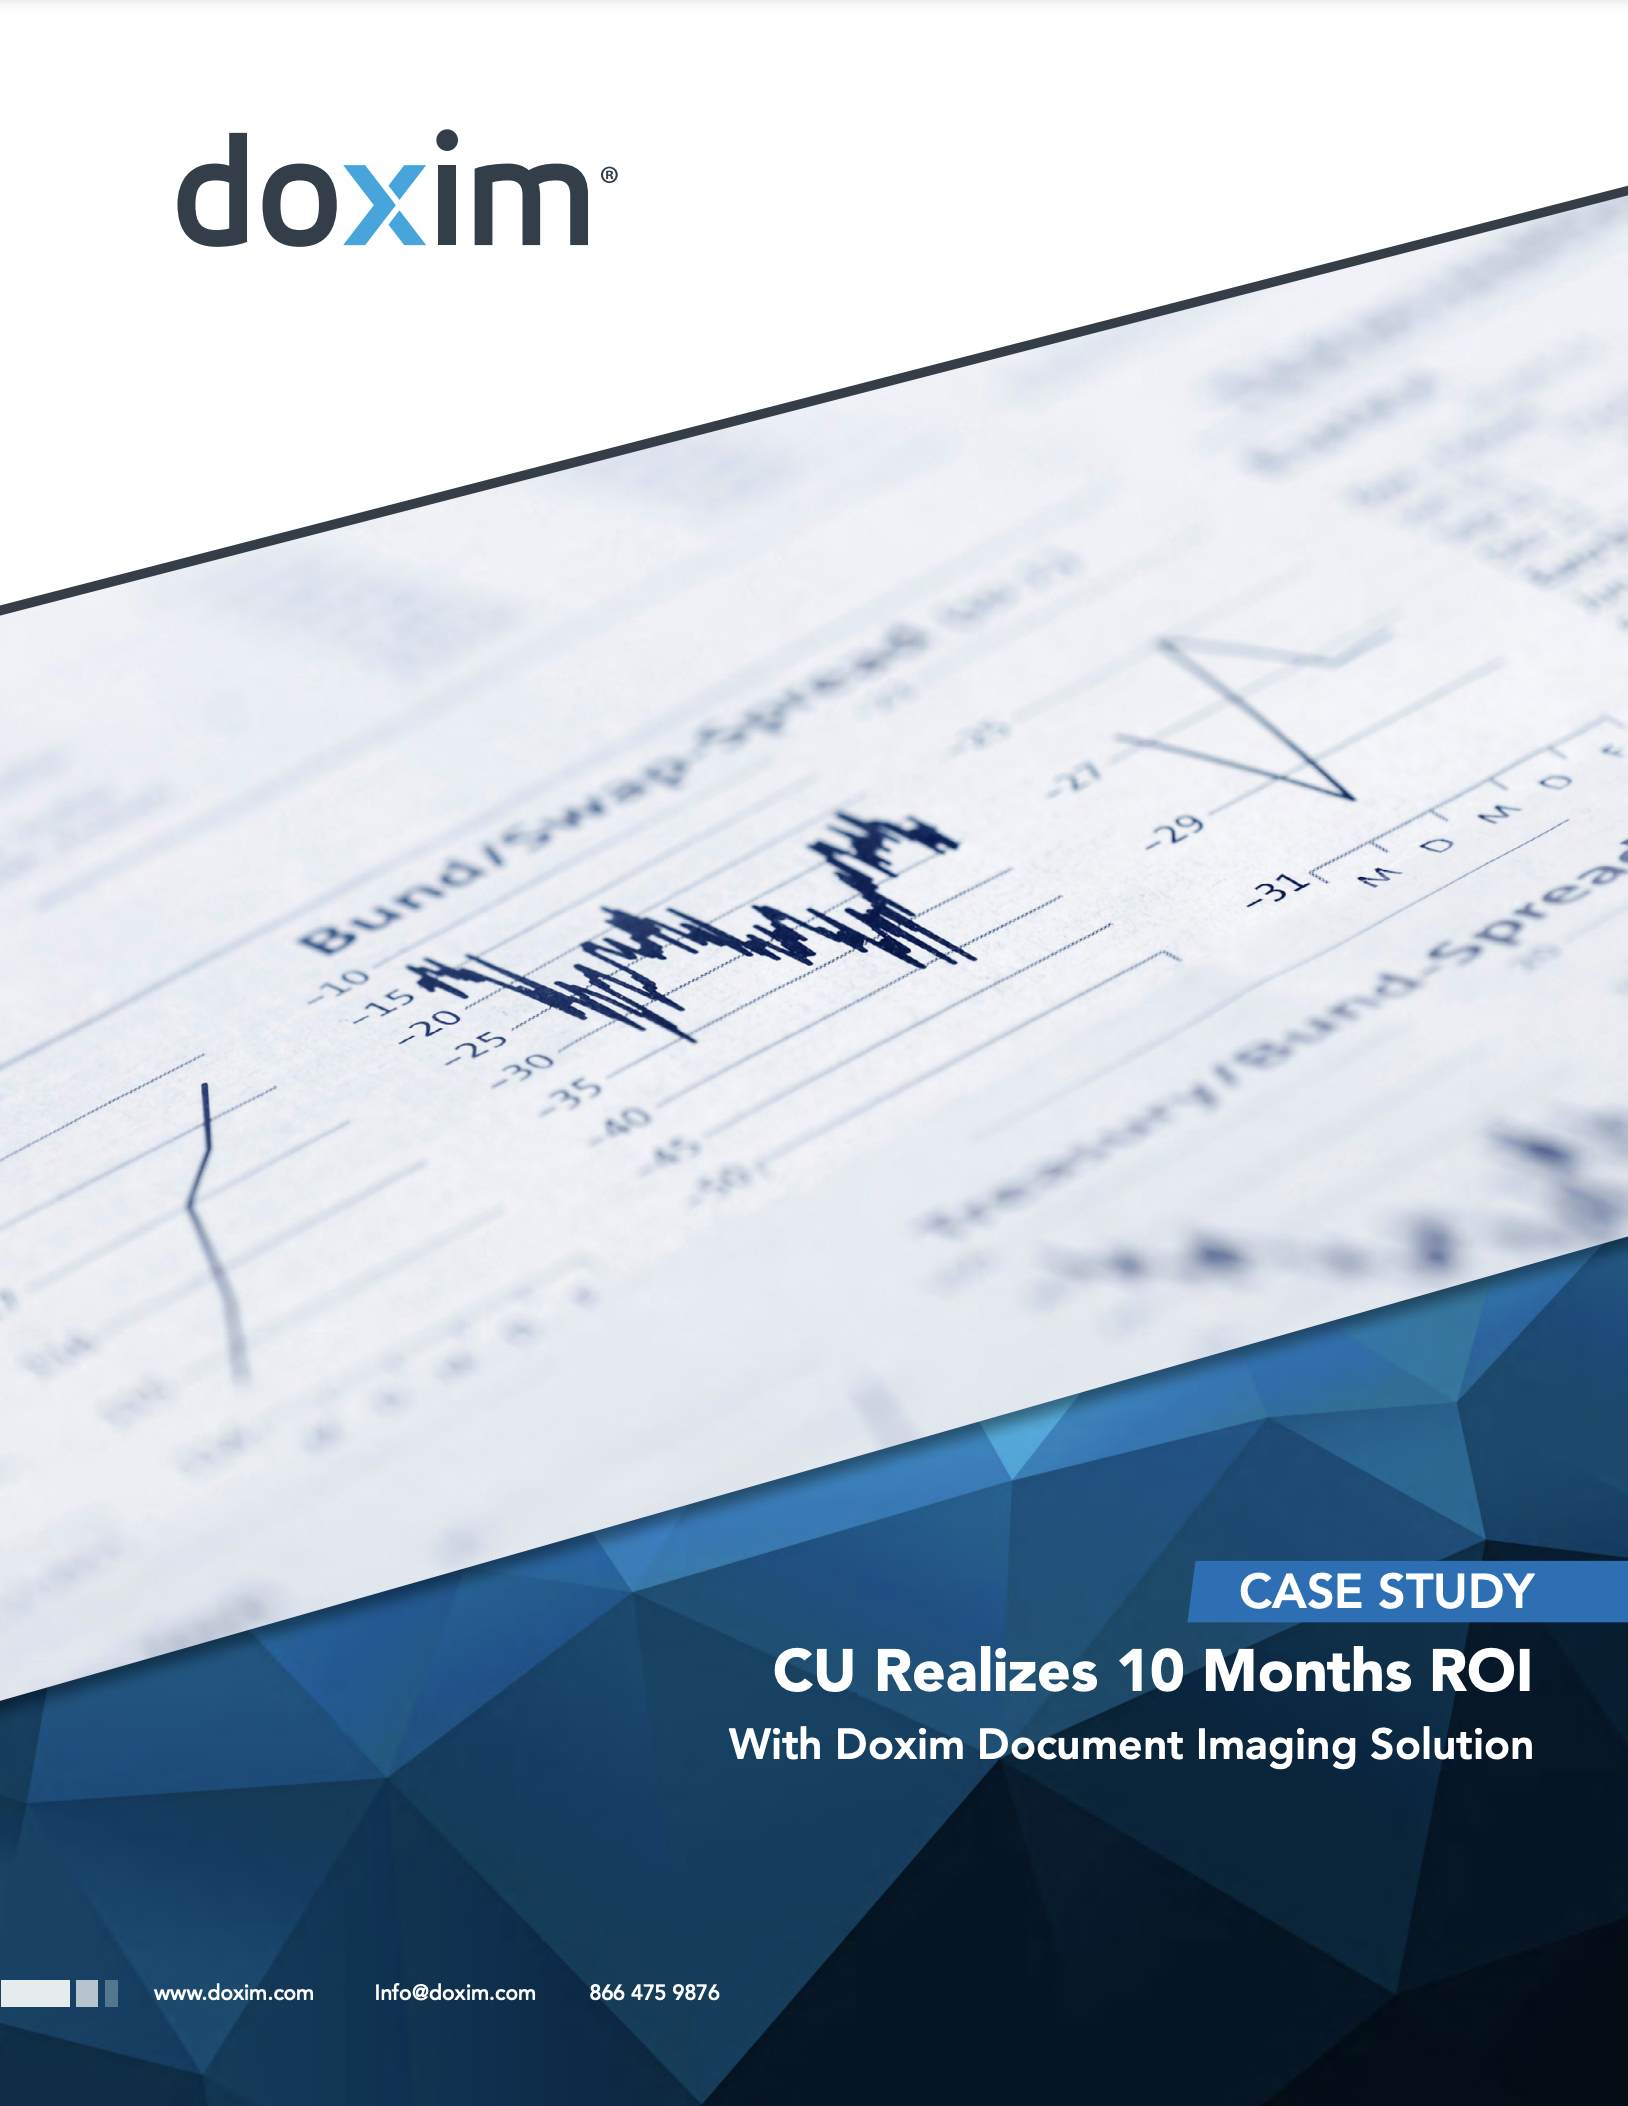 Case study: CU Realizes 10 Months ROI With Doxim Document Imaging Solution